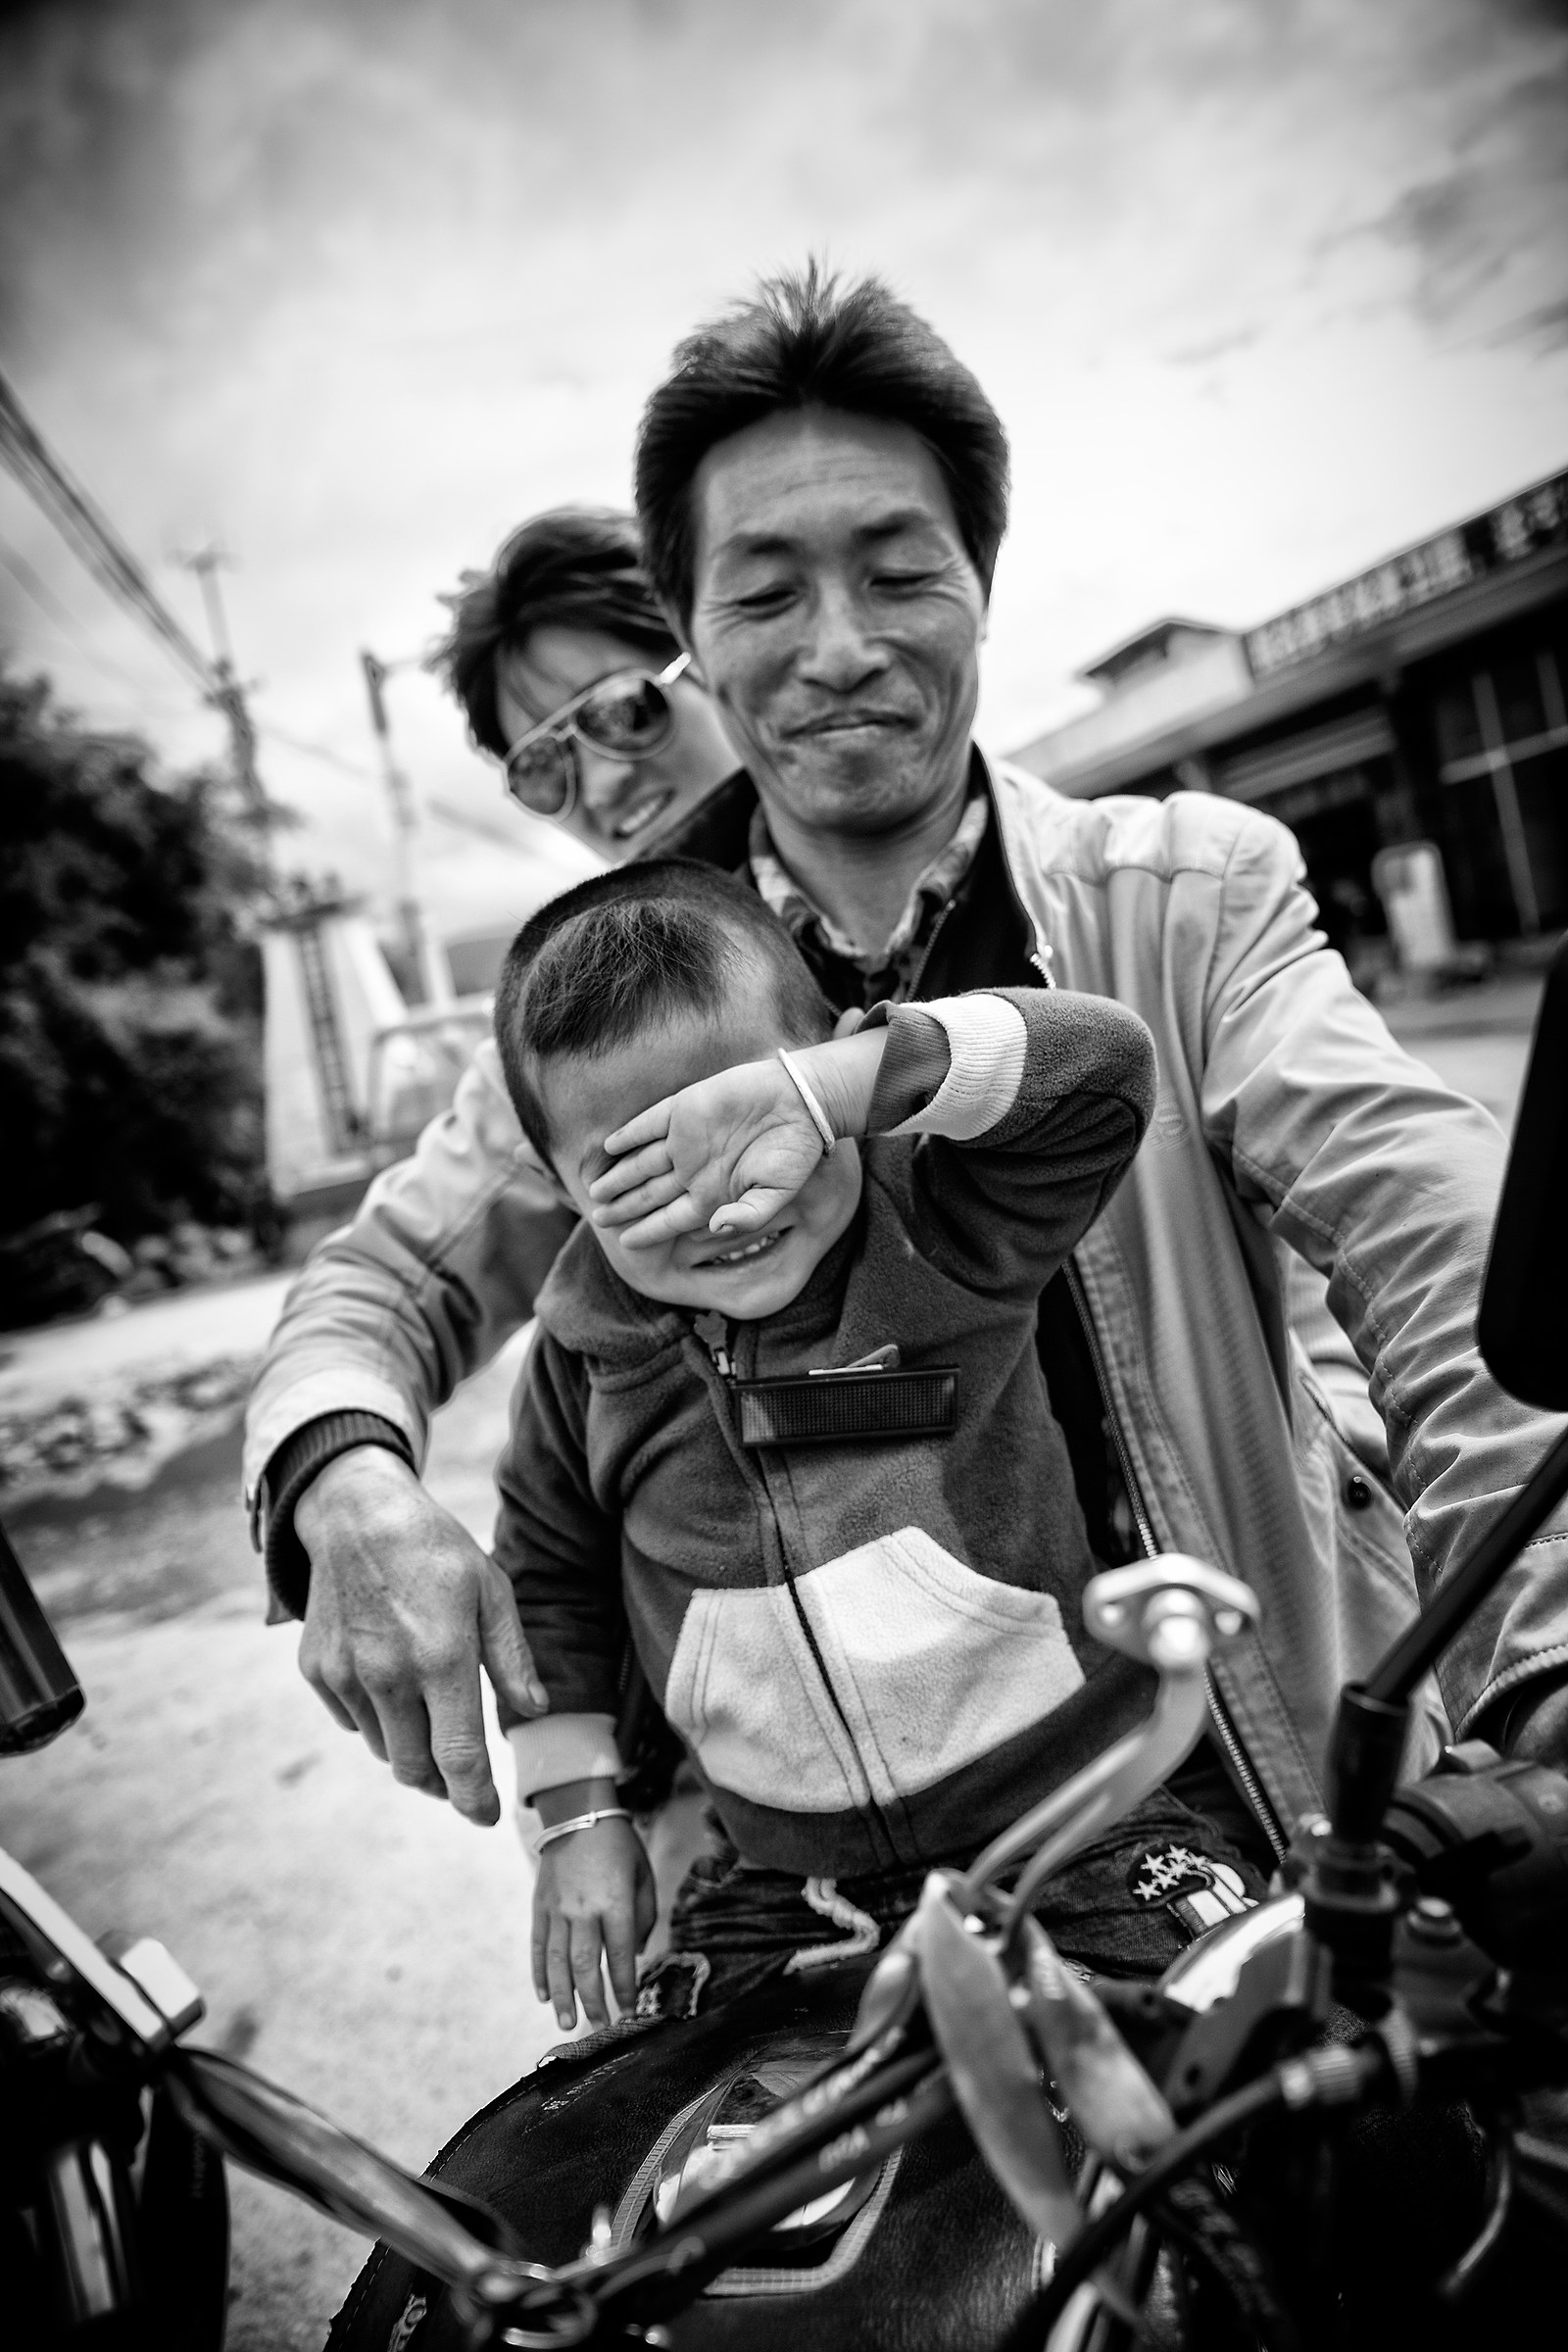 Family in a motorbike...